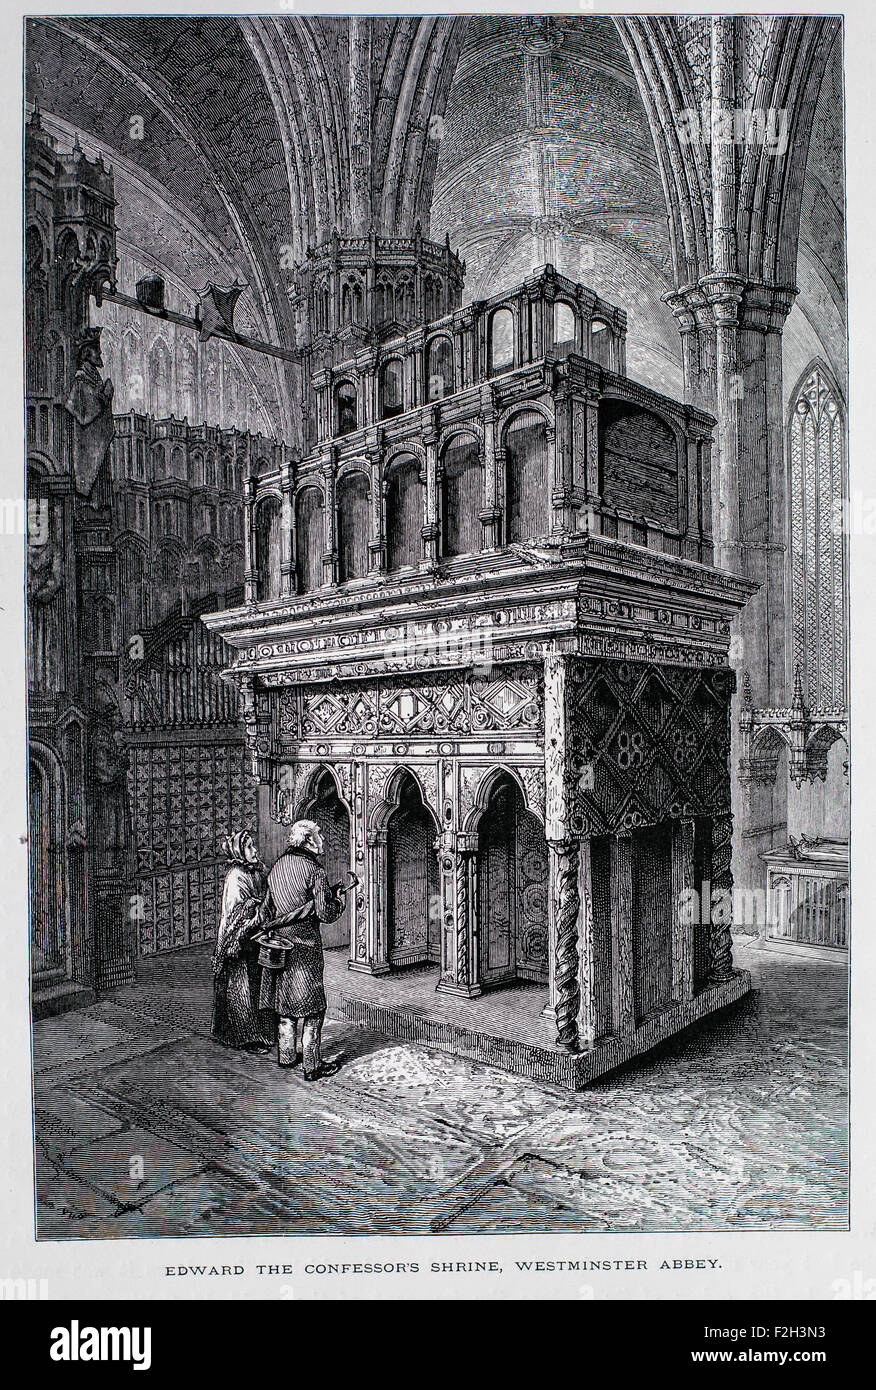 Edward the Confessor Shrine, Westminster Abbey  Illustration from 'The British isles - Cassell Petter & Galpin Part 6 Picturesque Europe. Picturesque Europe was an illustrated set of Magazines published by Cassell, Petter, Galpin & Co. of London, Paris and New York in 1877. The publications depicted tourist haunts in Europe, with text descriptions and steel and wood engravings by eminent artists of the time, such as Harry Fenn, William H J Boot, Thomas C. L. Rowbotham, Henry T. Green , Myles B. Foster, John Mogford , David H. McKewan, William L. Leitch, Edmund M. Wimperis and Joseph B. Smith. Stock Photo